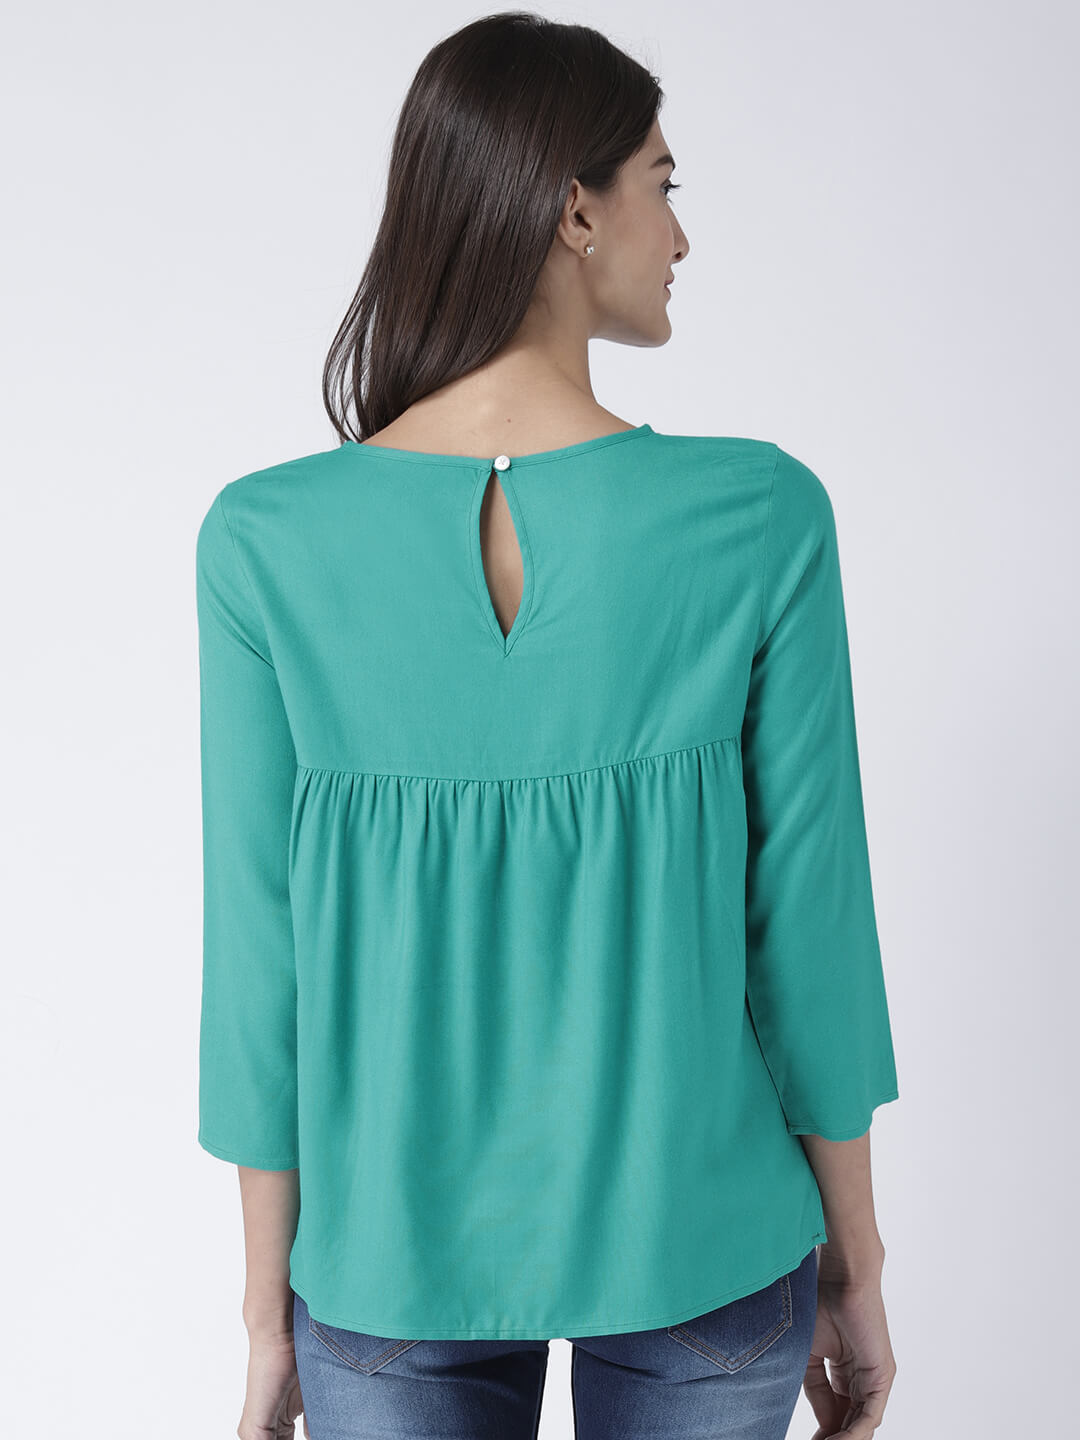 Women'S Embroidered Rayon Top